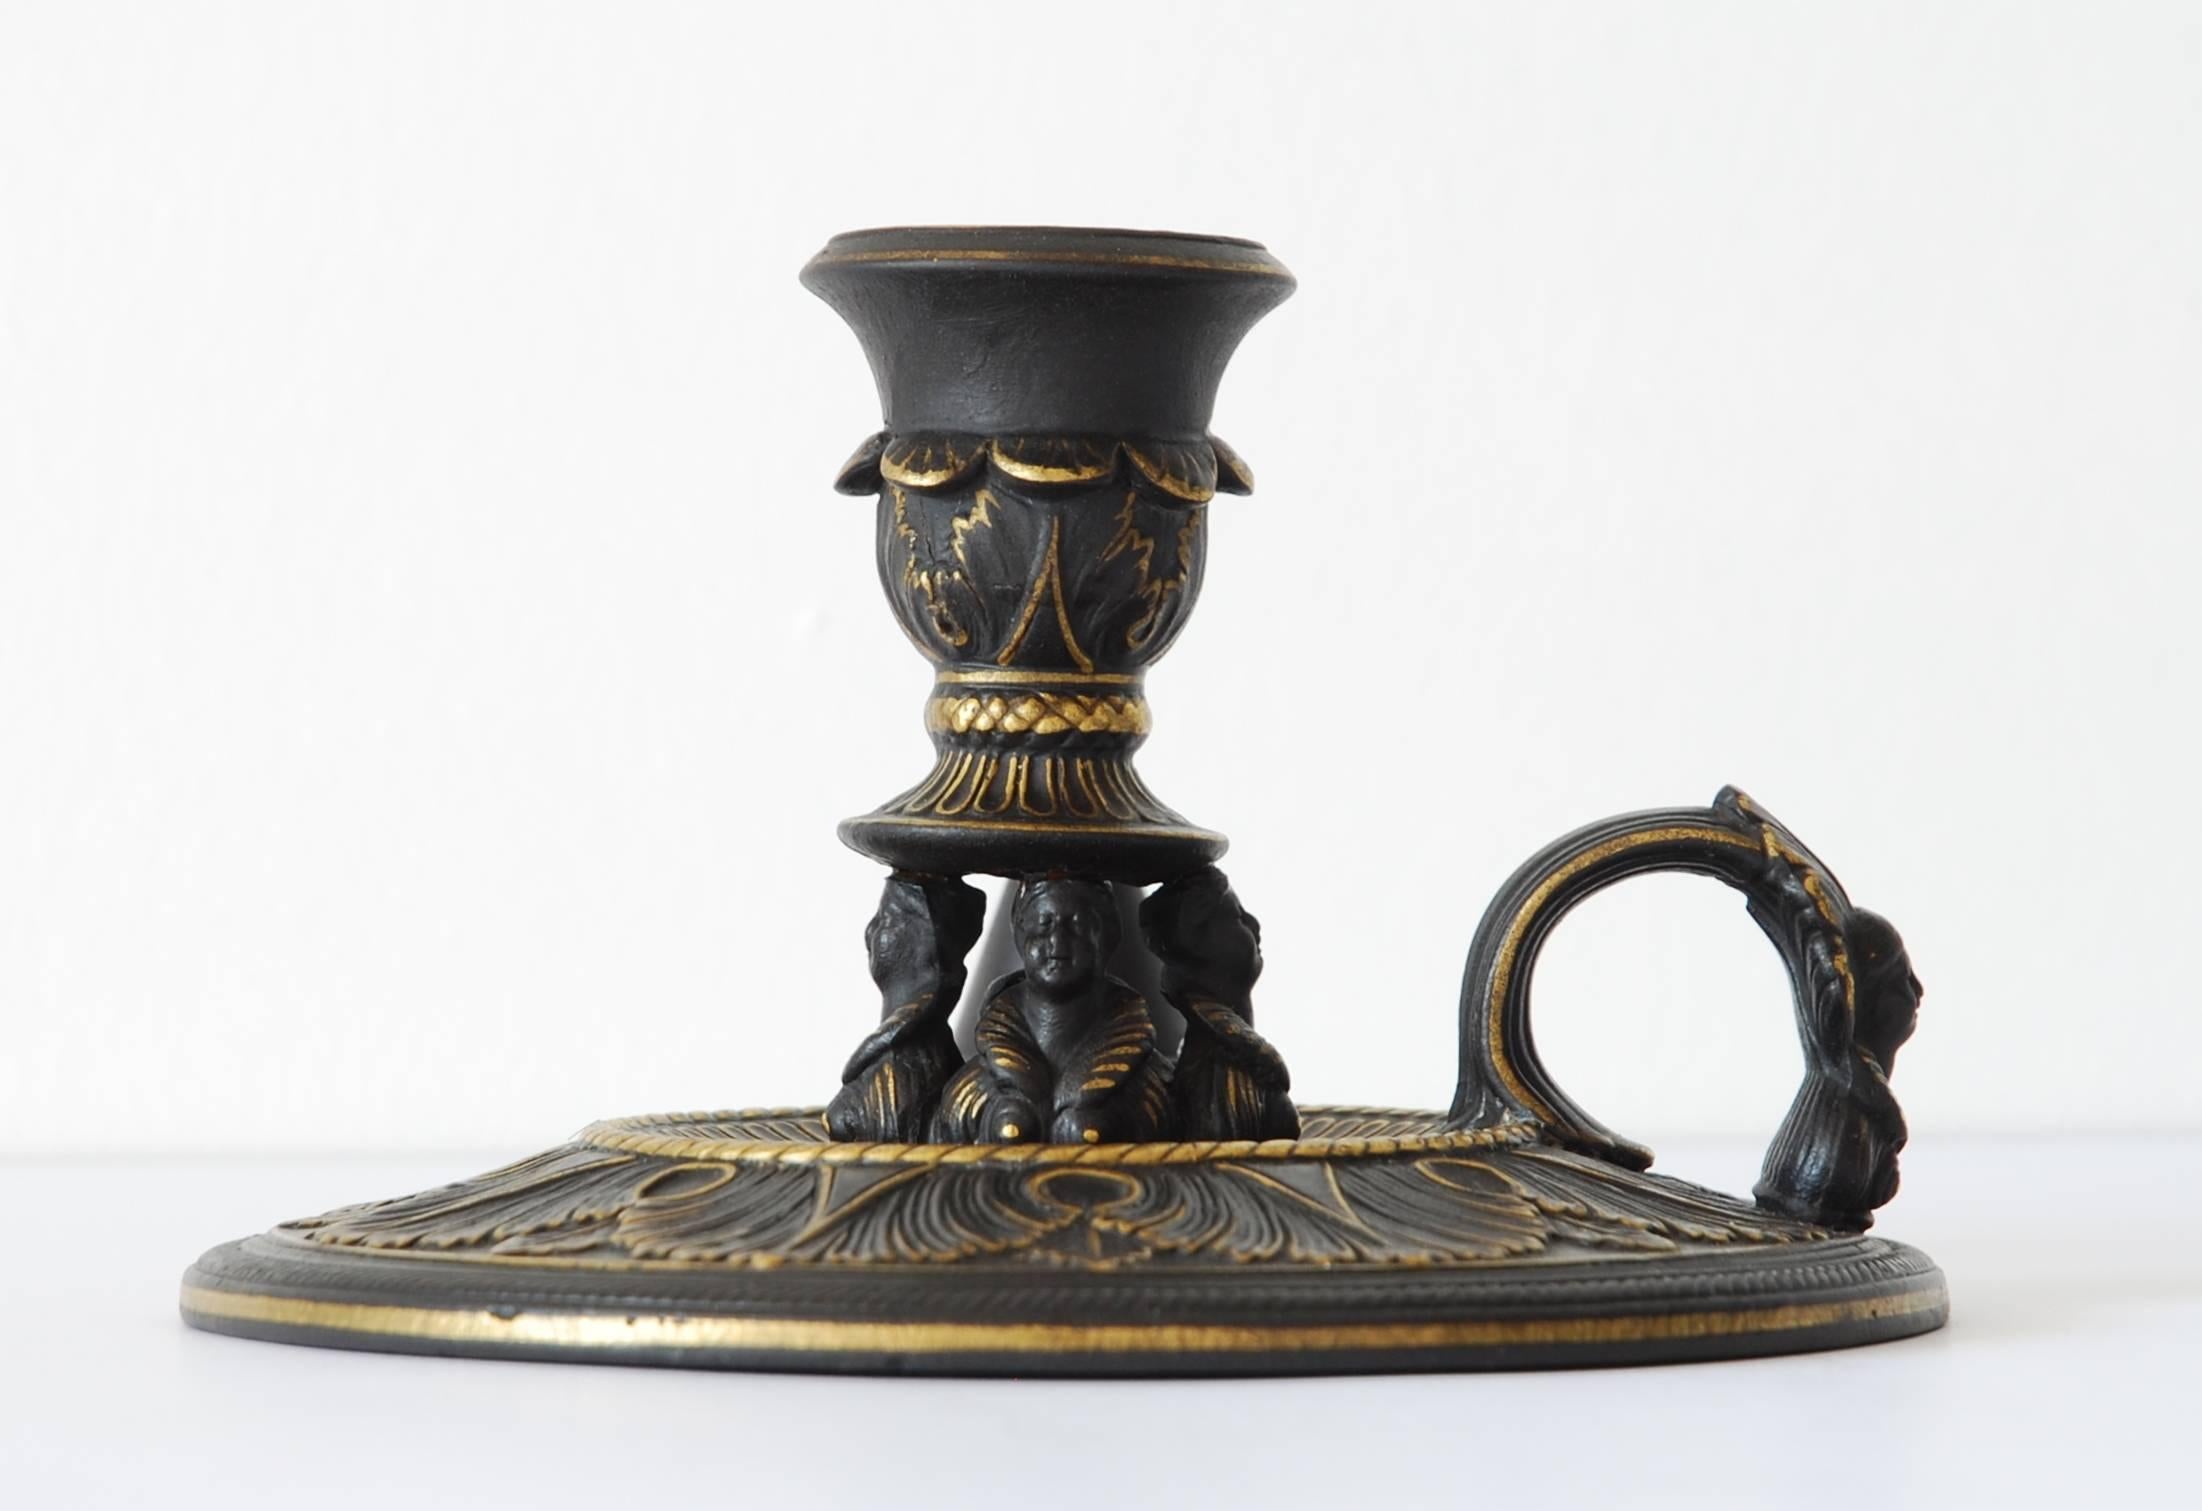 In black basalt, with gilt highlights. The design is most unusual, with numerous busts of Queen Elizabeth I supporting the sconce.